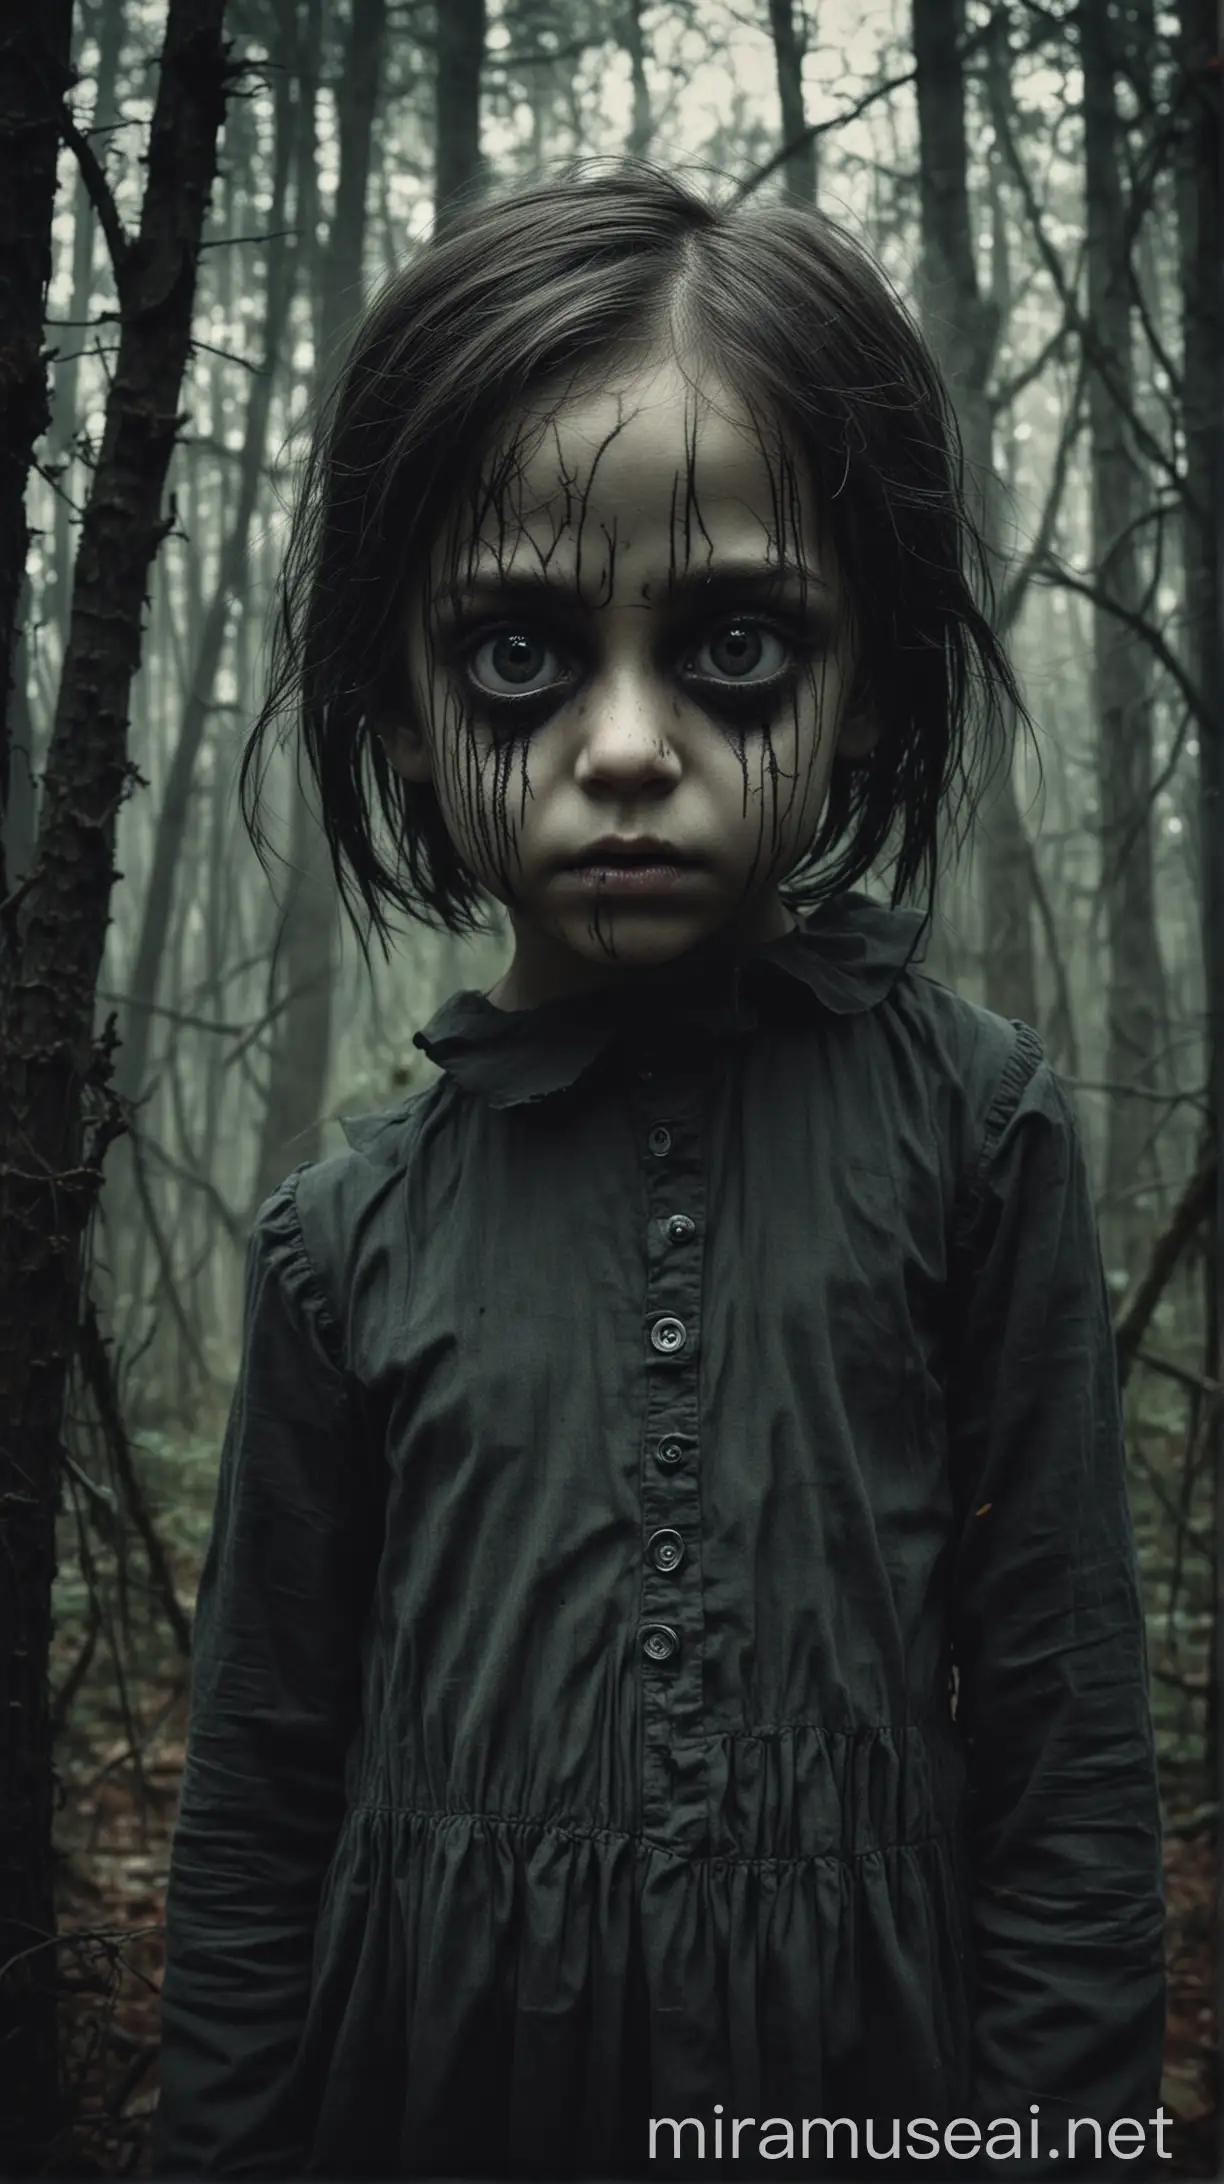 BlackEyed Child in Haunted Forest with Creepy Gaze